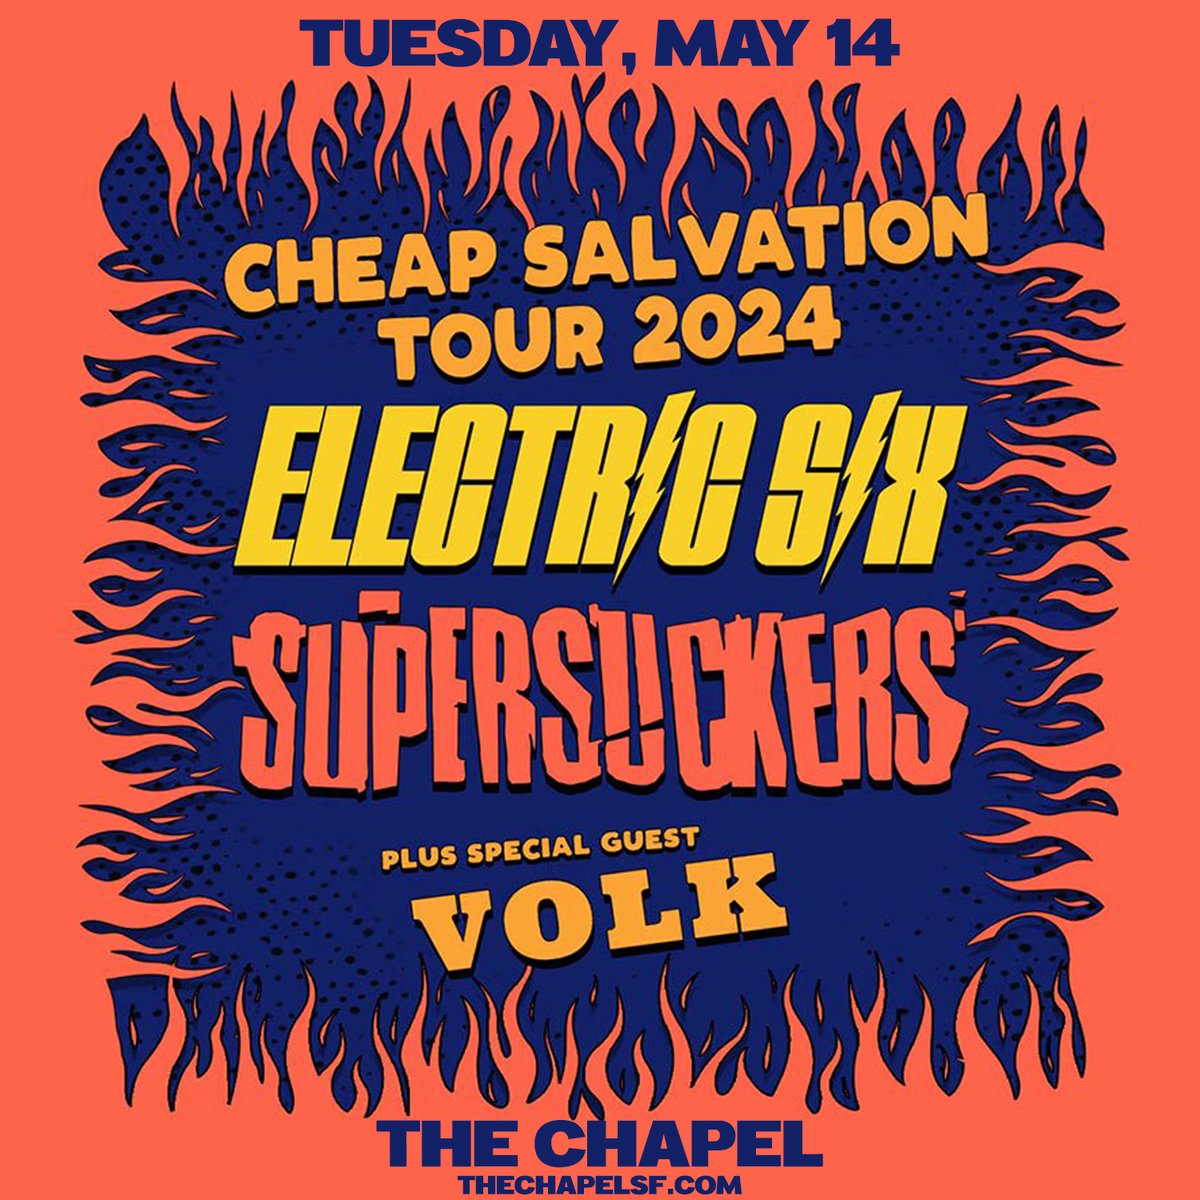 Get ready... @electric6 + @SupersuckersRnR + @volk_band bring their Cheap Salvation Tour to The Chapel this Tuesday, May 14! 🔥 Don't miss it: tinyurl.com/4mwzn9wj